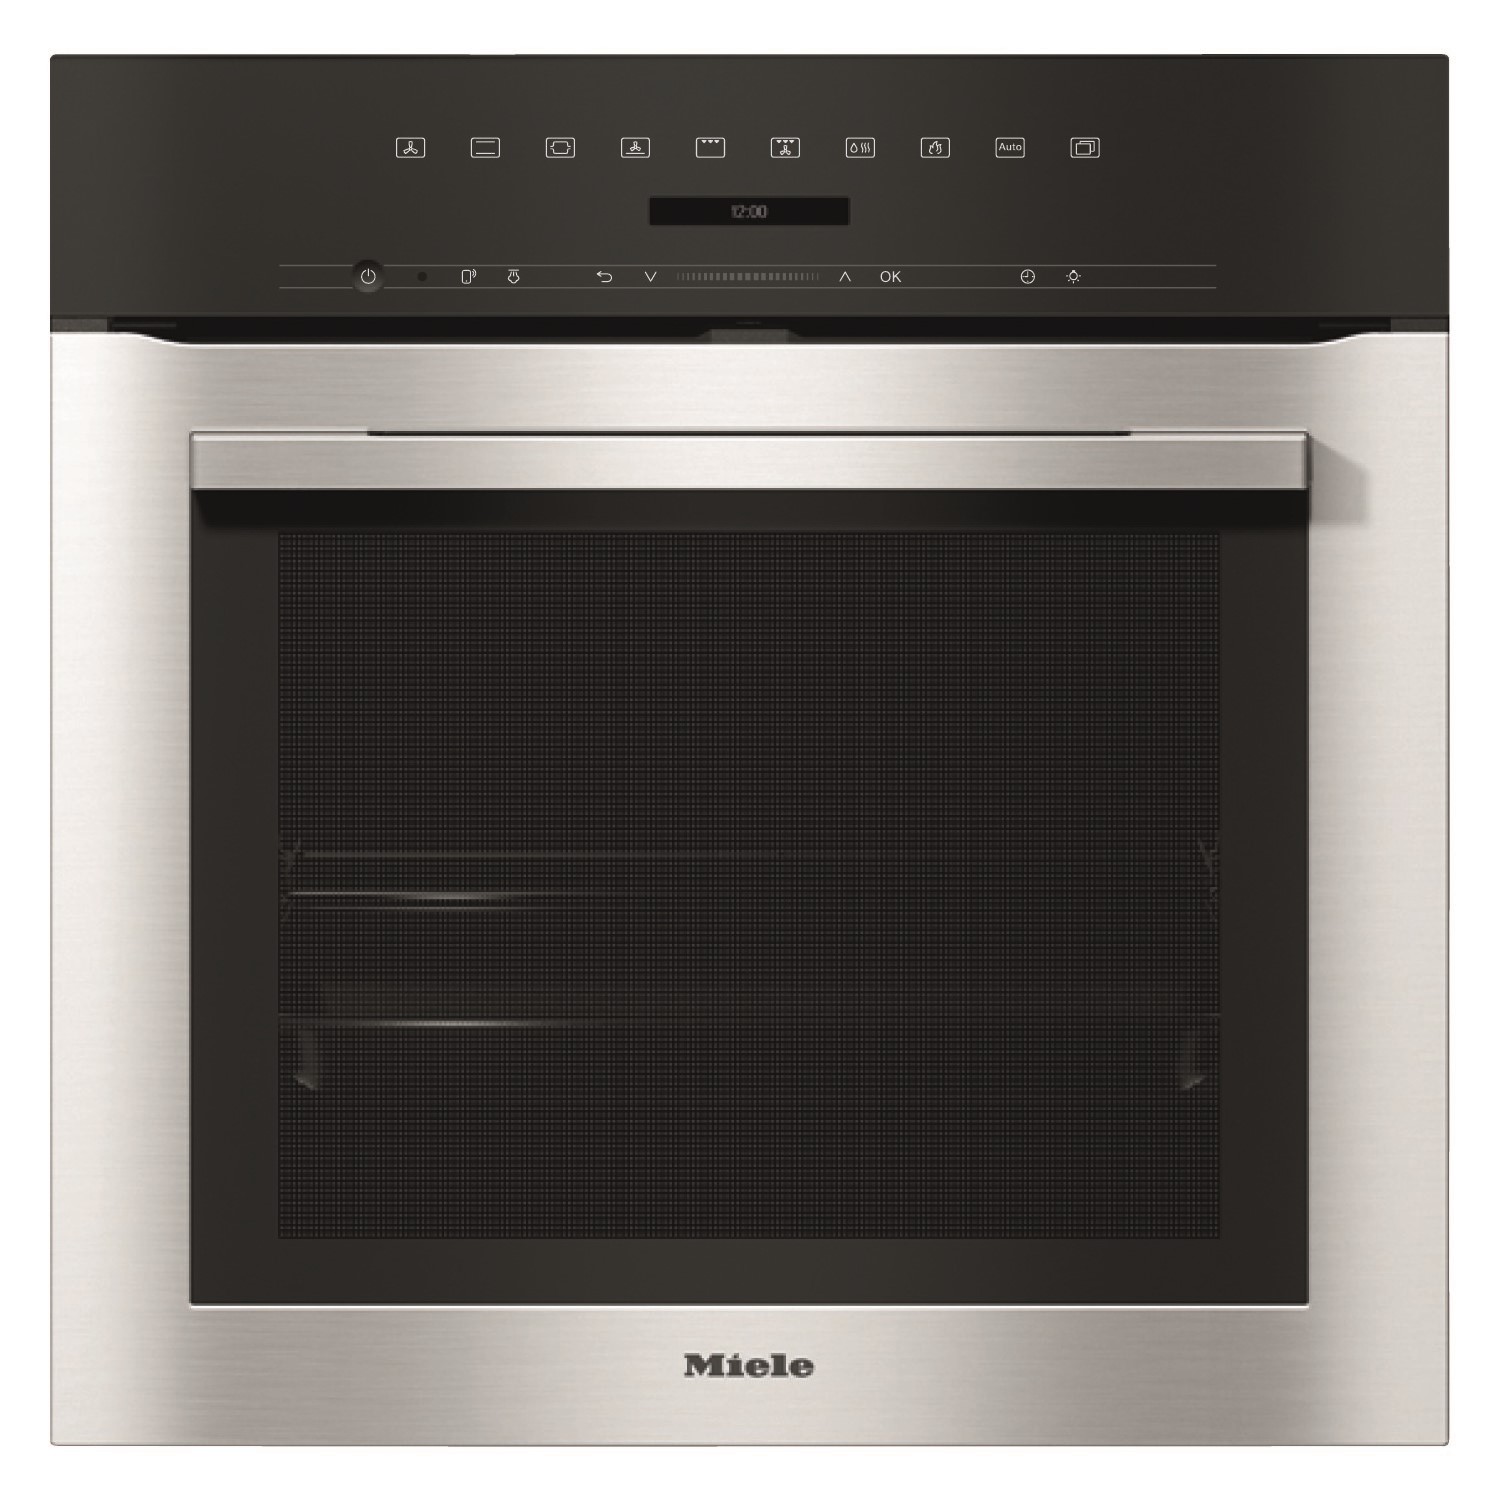 Miele ContourLine Touch Control Single Oven with Pyrolytic Cleaning - Clean Steel